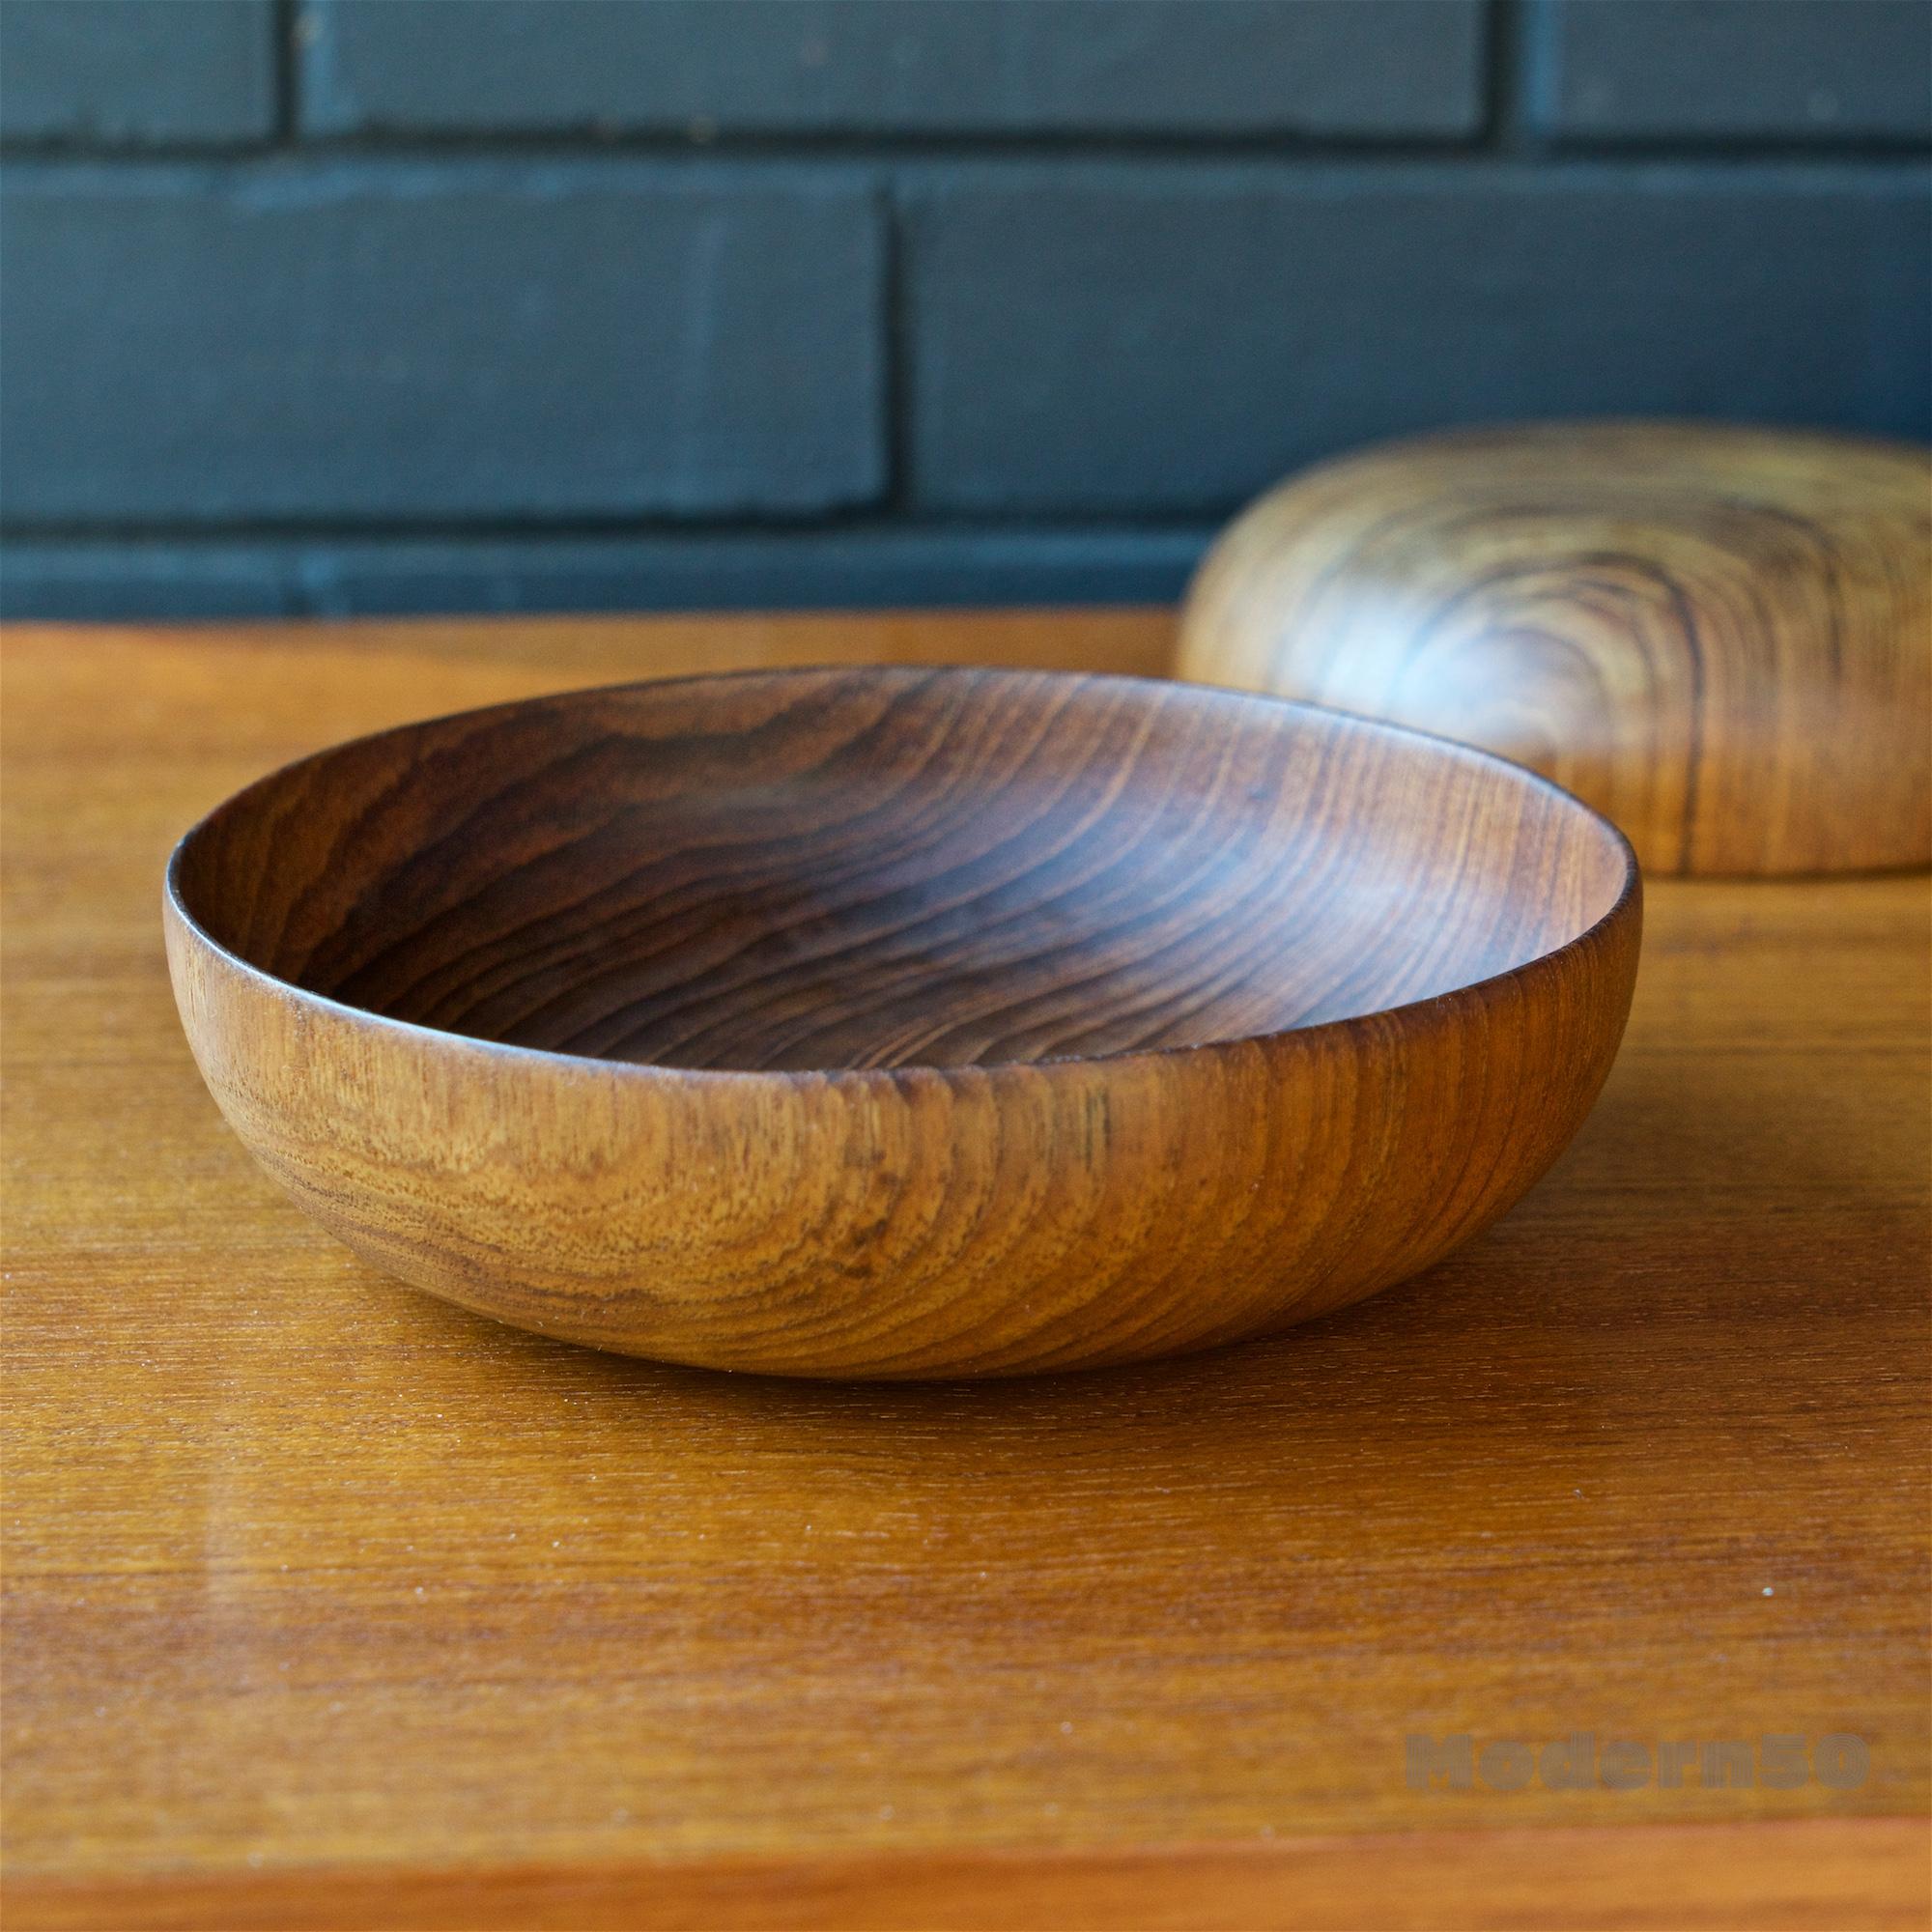 7 Unknown Craftsman Studio Craft Turned Teak Bowl Set Midcentury Danish Rustic In Distressed Condition For Sale In Hyattsville, MD